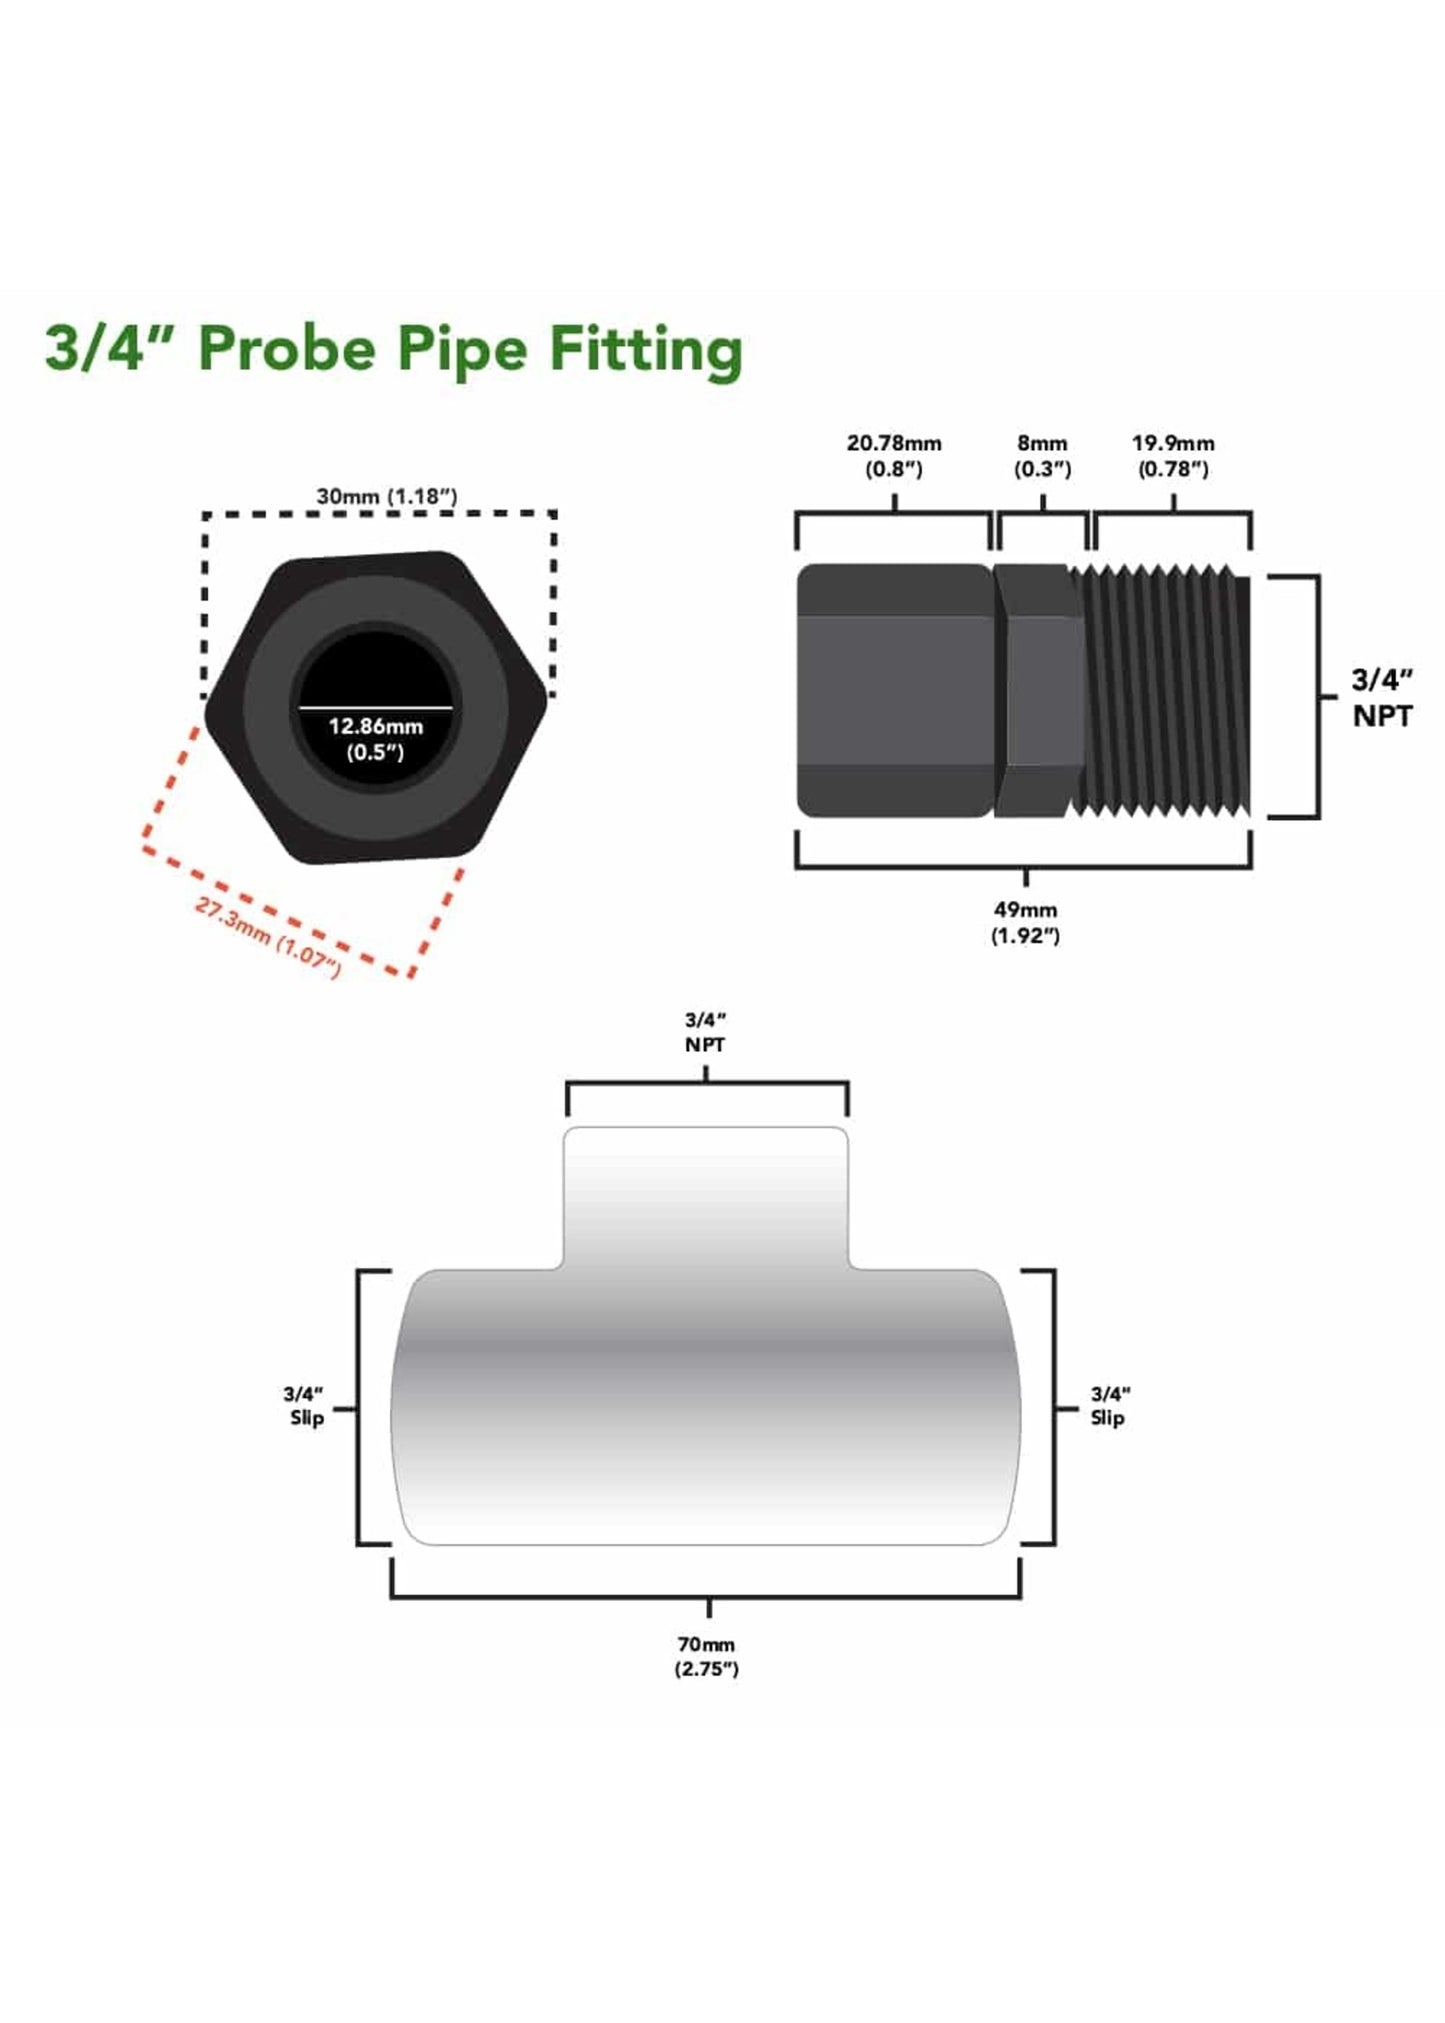 Probe Pipe Fitting